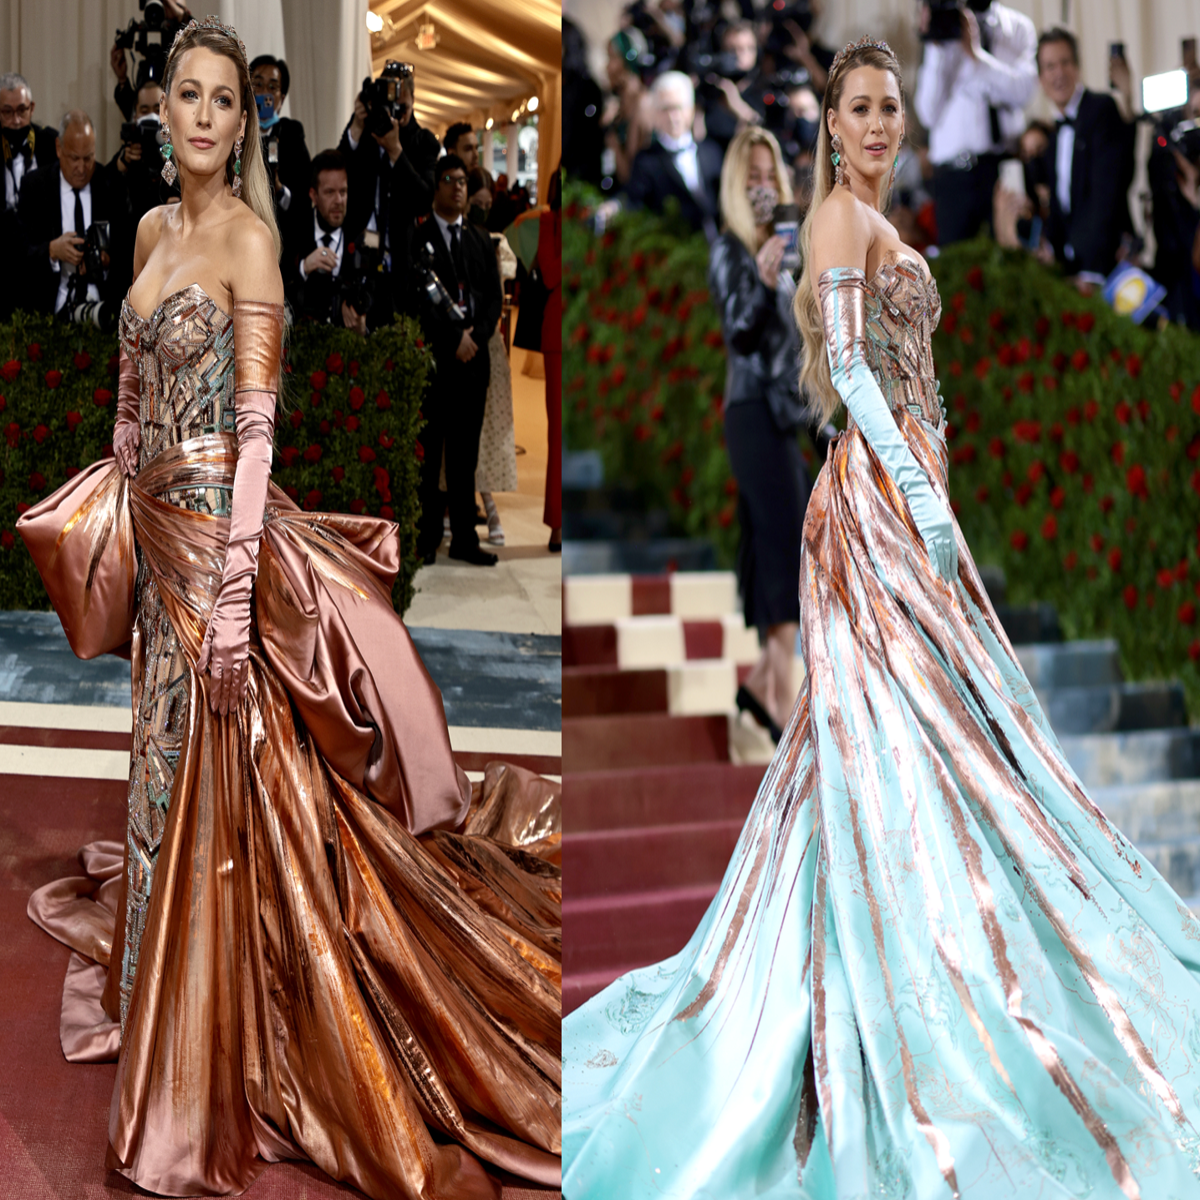 The best dressed stars from the 2022 Met Gala | The Independent